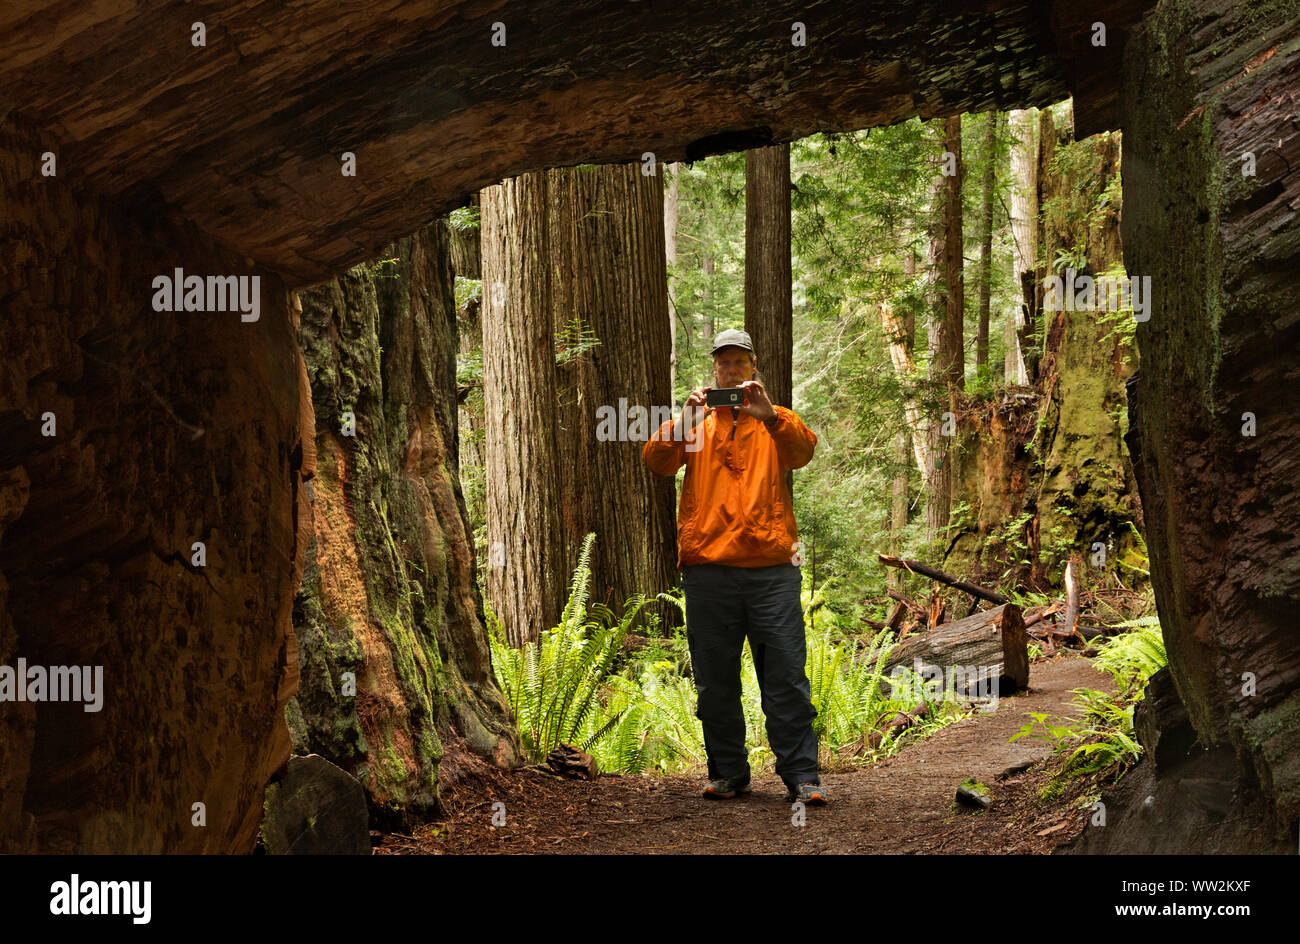 CA03551-00...CALIFORNIA - Hiker taking a cell phone image of a tunnel through a giant redwood log on the James Irvine Trail in Prairie Creek Redwoods. Stock Photo